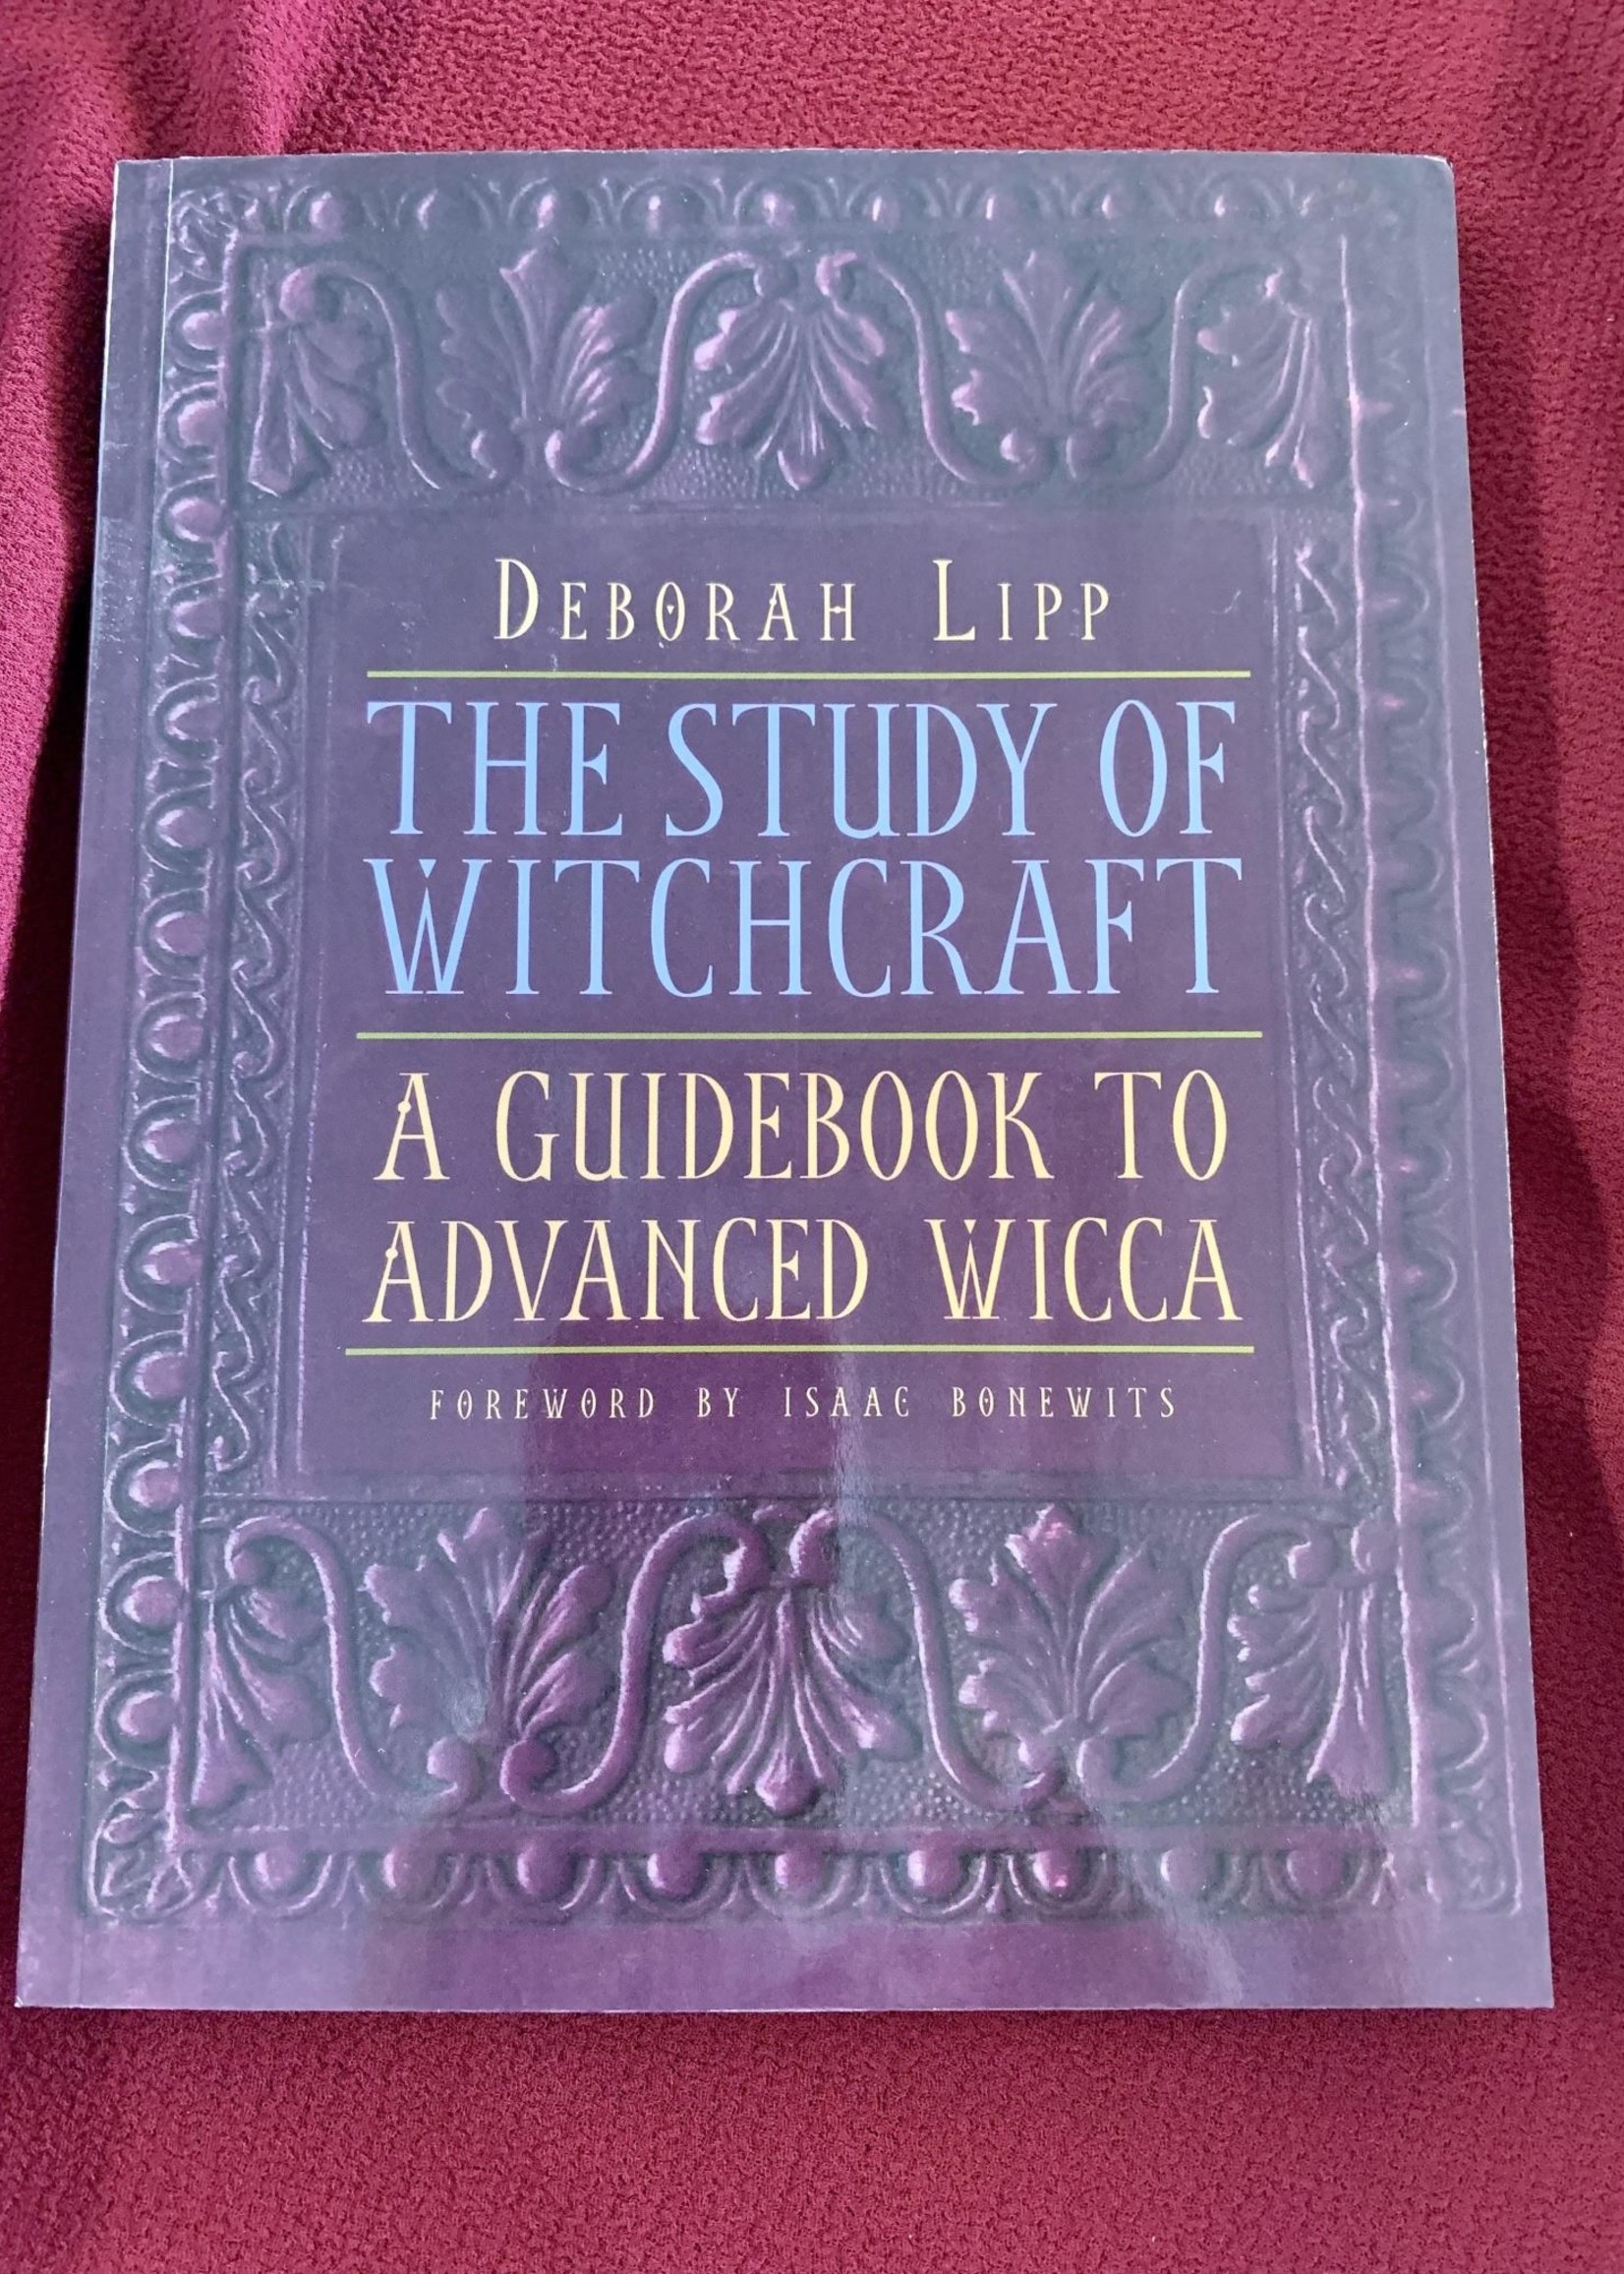 The Study of Witchcraft A Guidebook to Advanced - Wicca Deborah Lipp